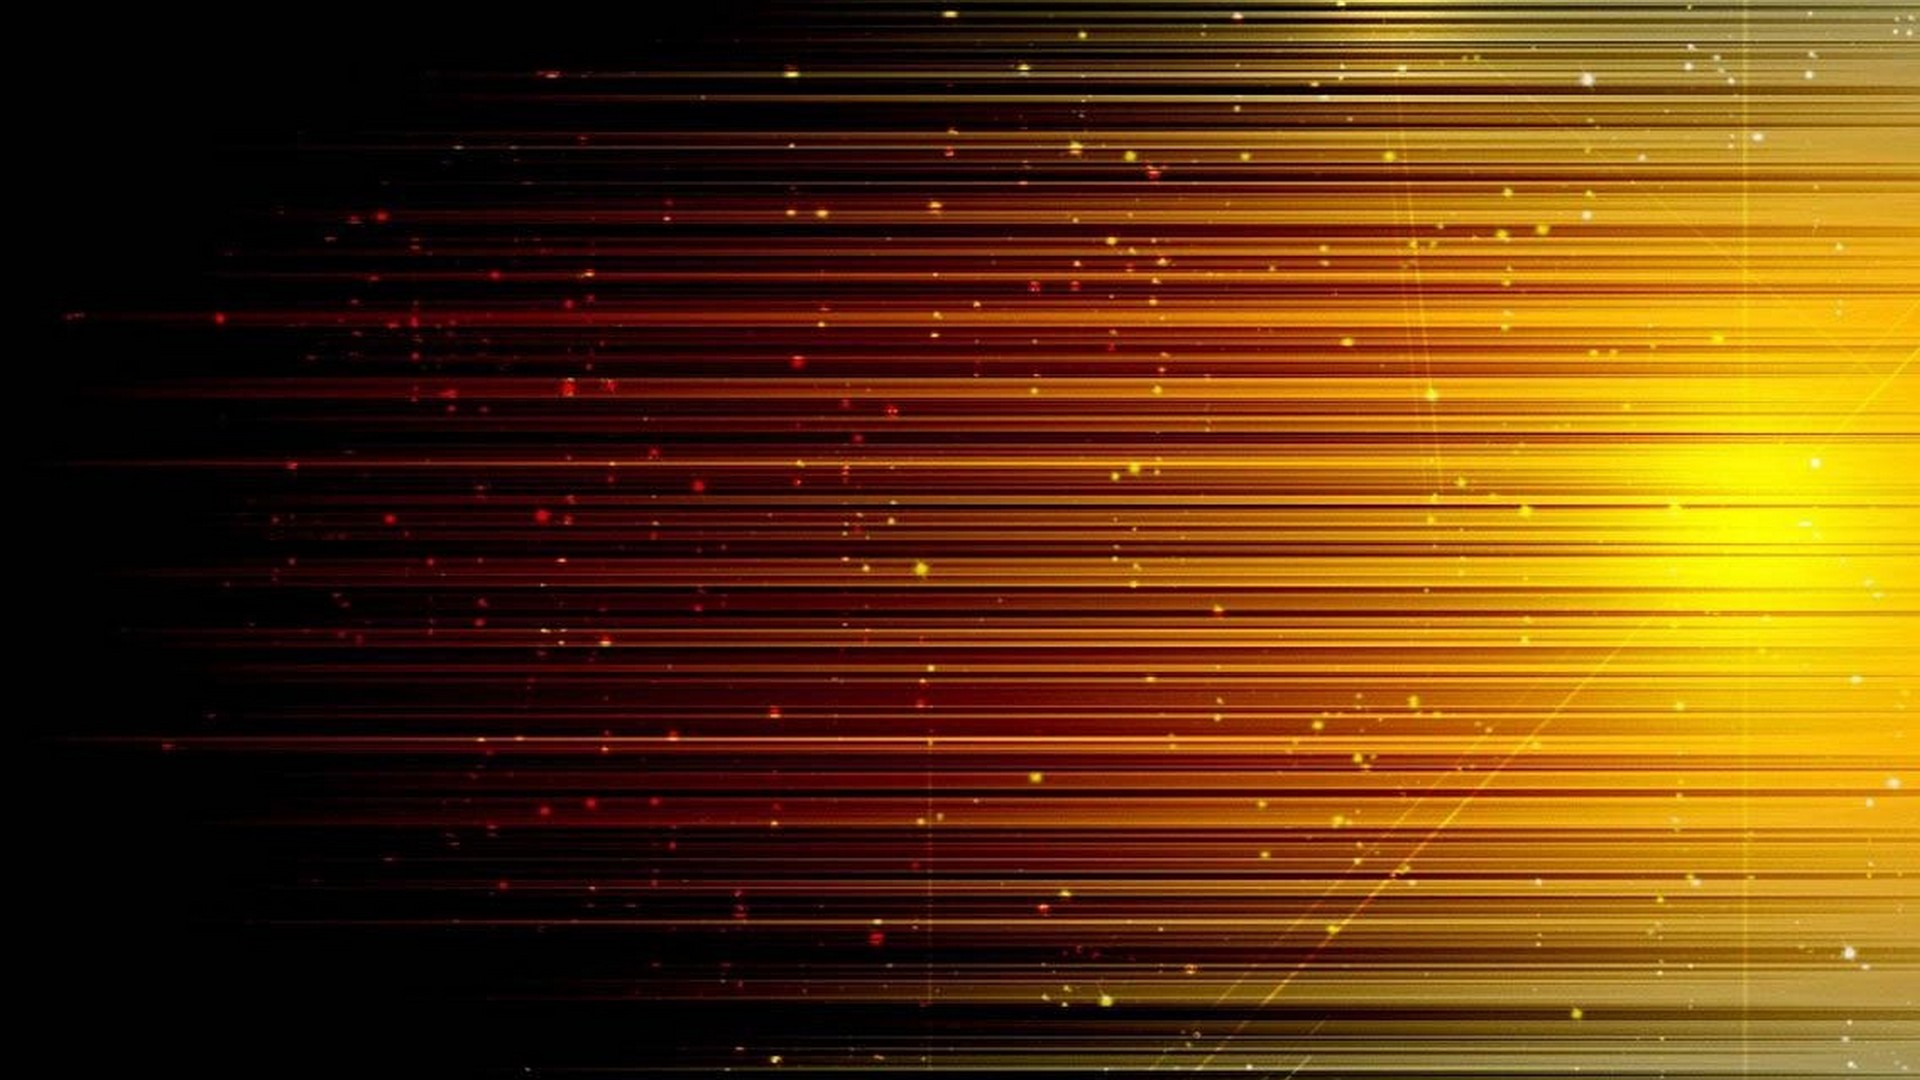 PC Wallpaper Black and Gold 1920x1080